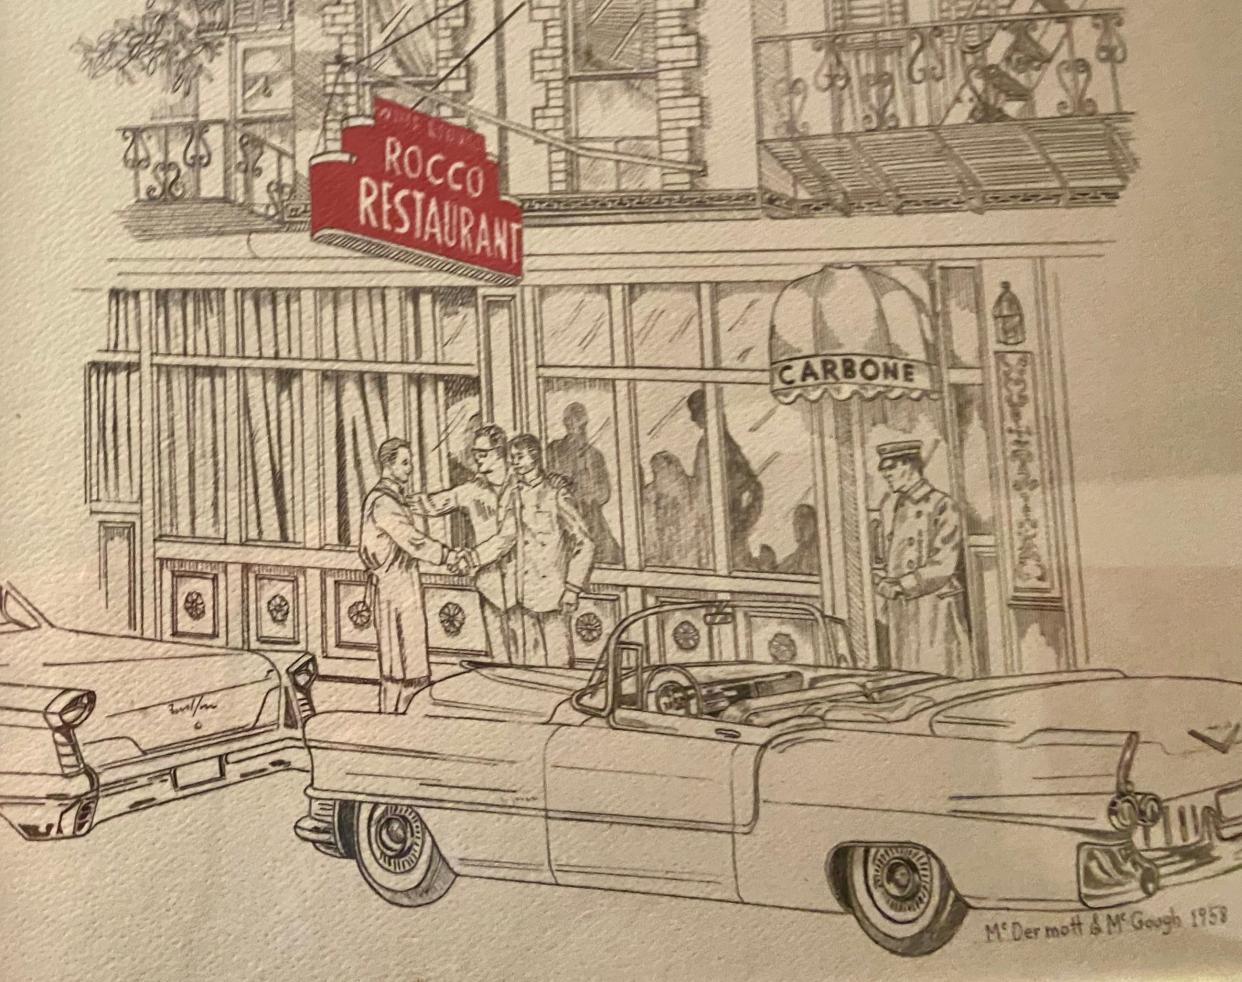 A drawing of the front of Rocco hangs in the restaurant in Rochester.